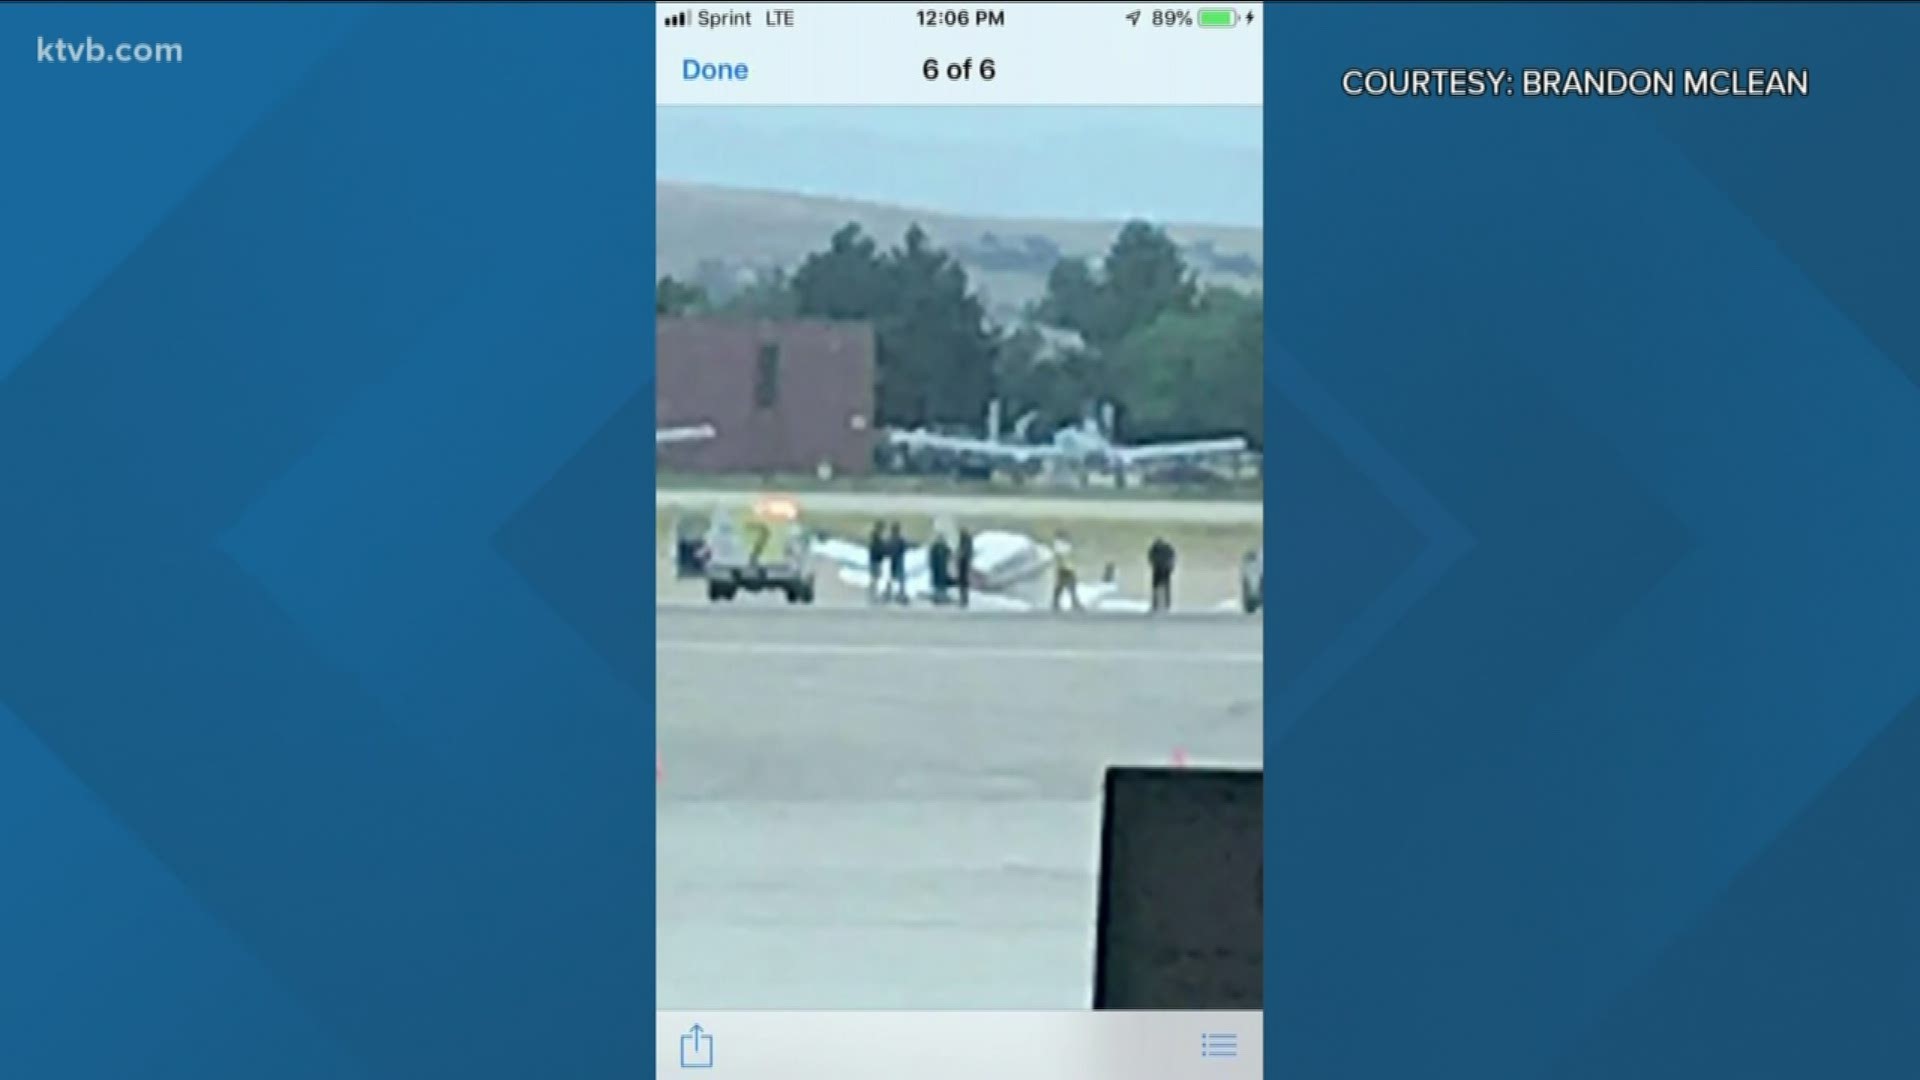 According to Boise Airport spokesman Sean Briggs, the Cessna plane landed normally, but something went wrong after it touched down. A "mechanical issue" sent the plane sliding off the runway into the airport's safety zone, Briggs said.